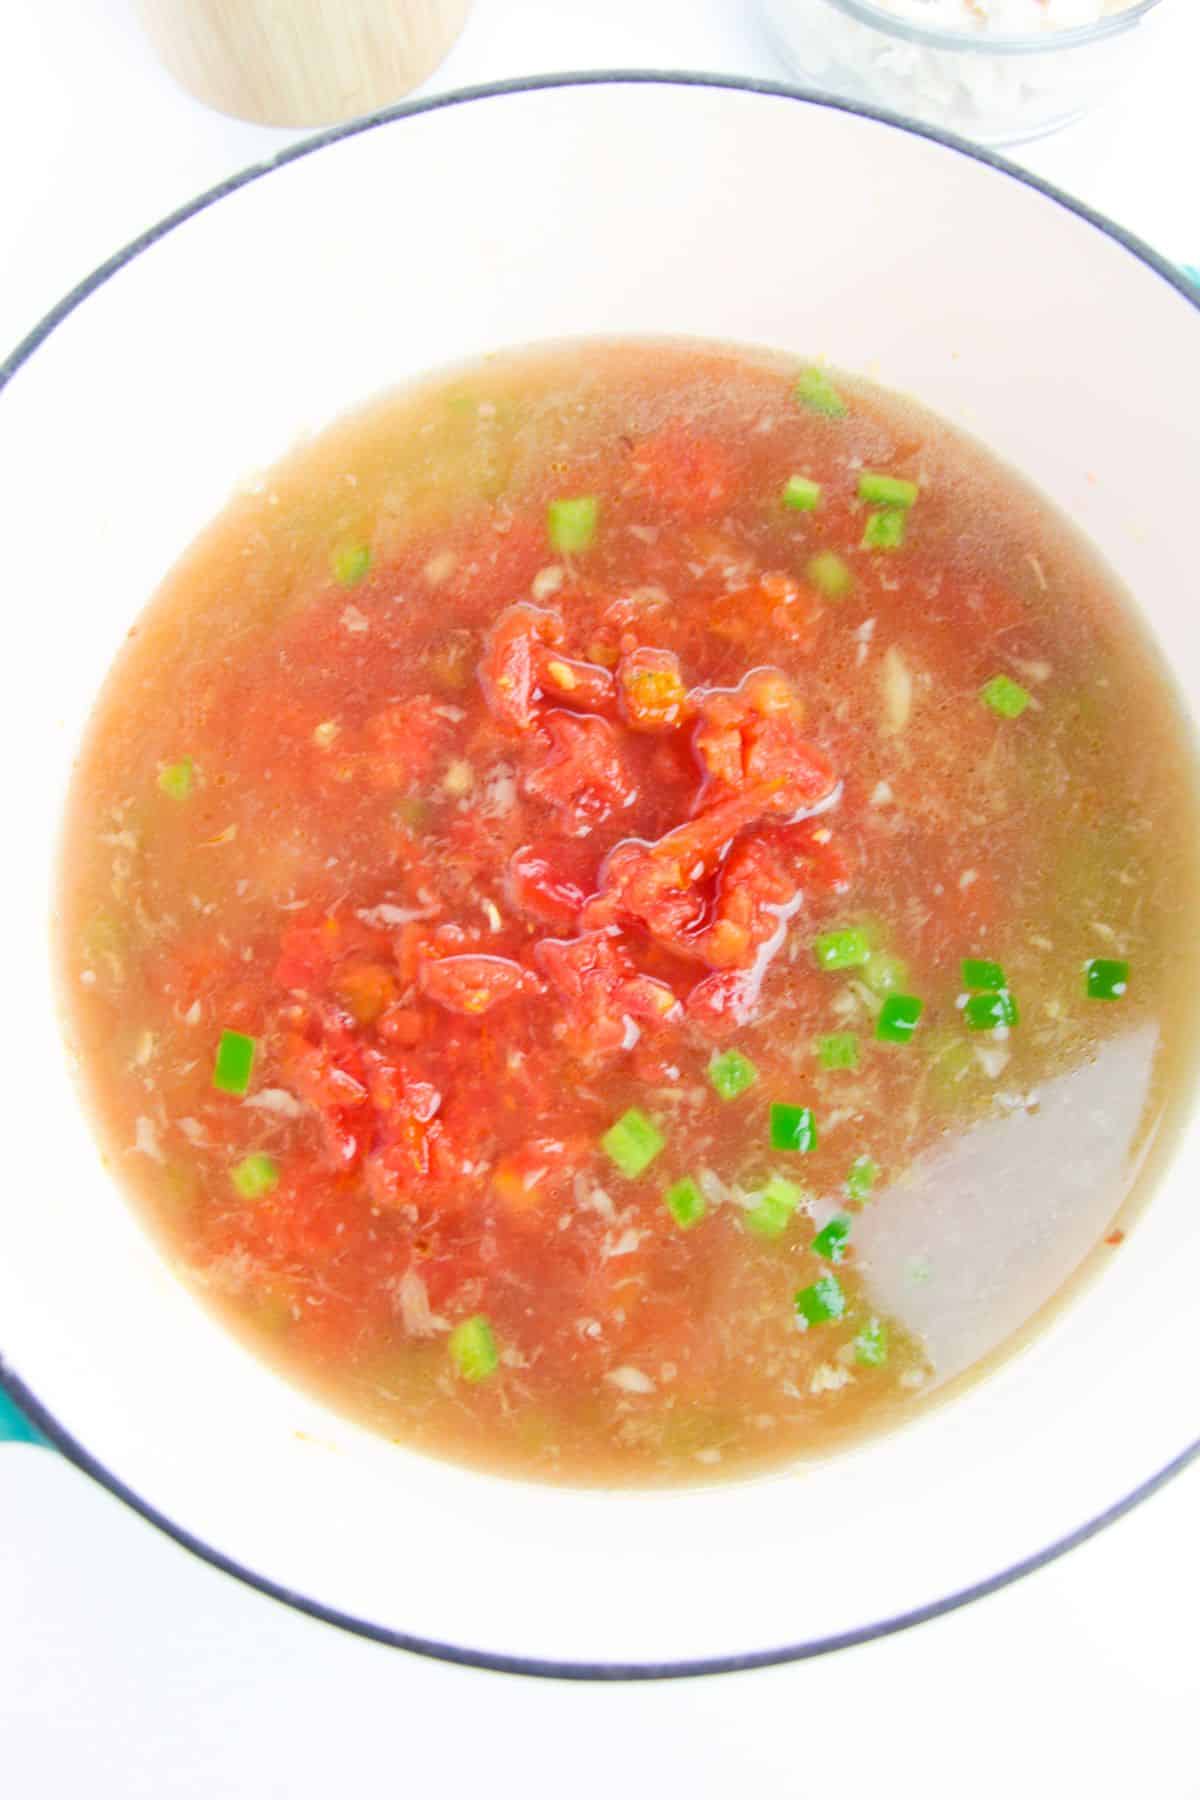 The chicken broth, tomatoes, and Rotel are added to the soup pot.